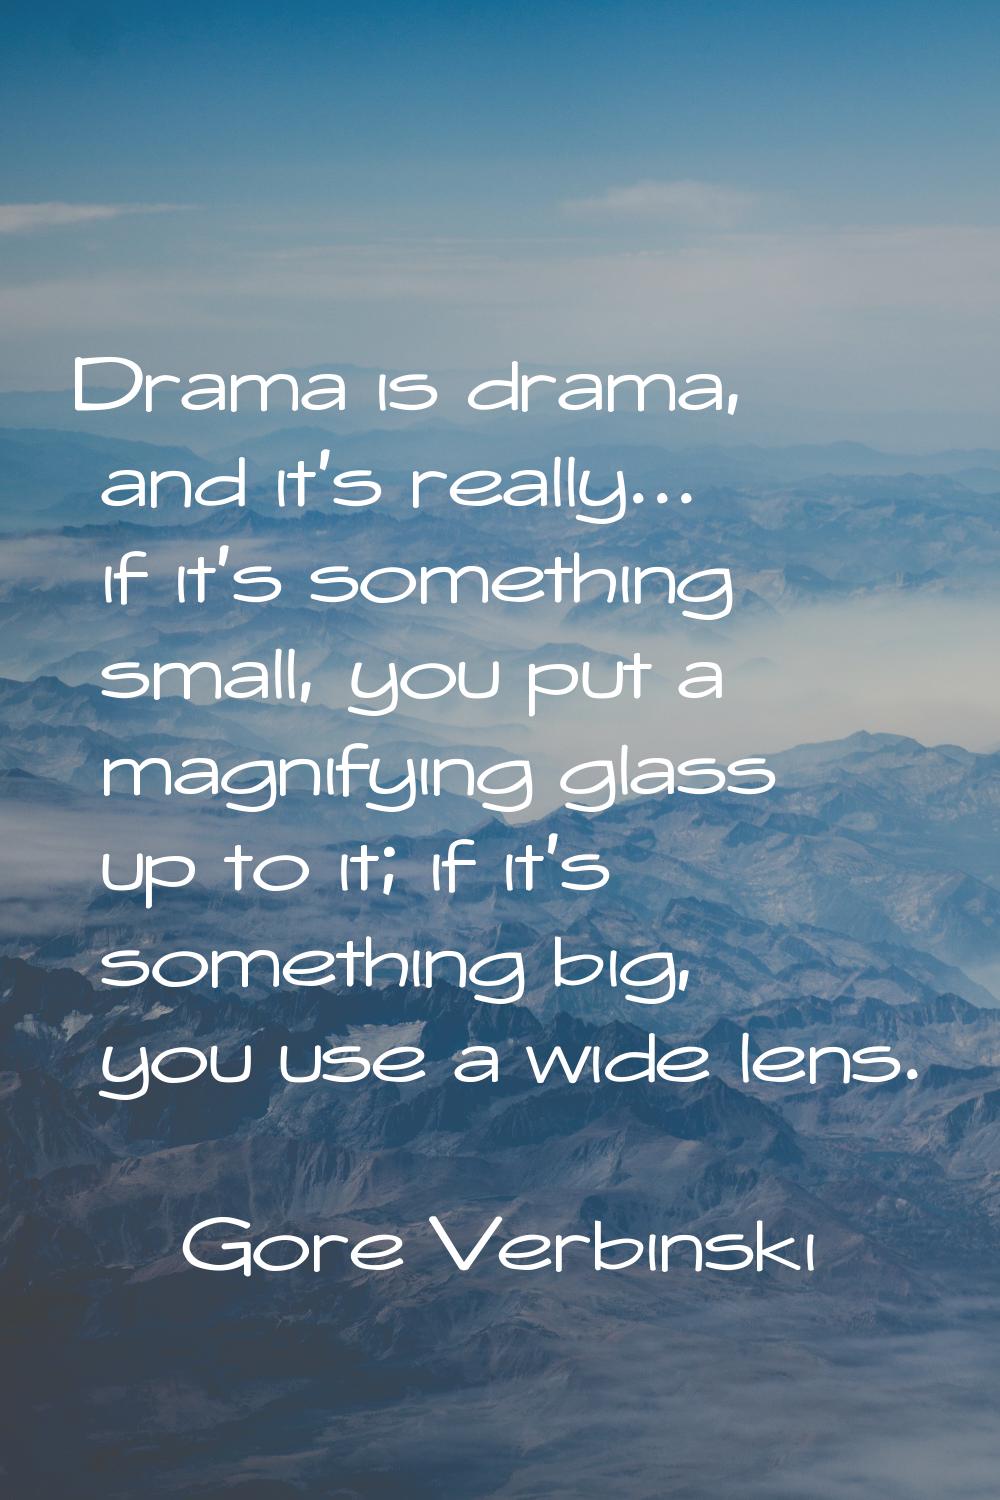 Drama is drama, and it's really... if it's something small, you put a magnifying glass up to it; if